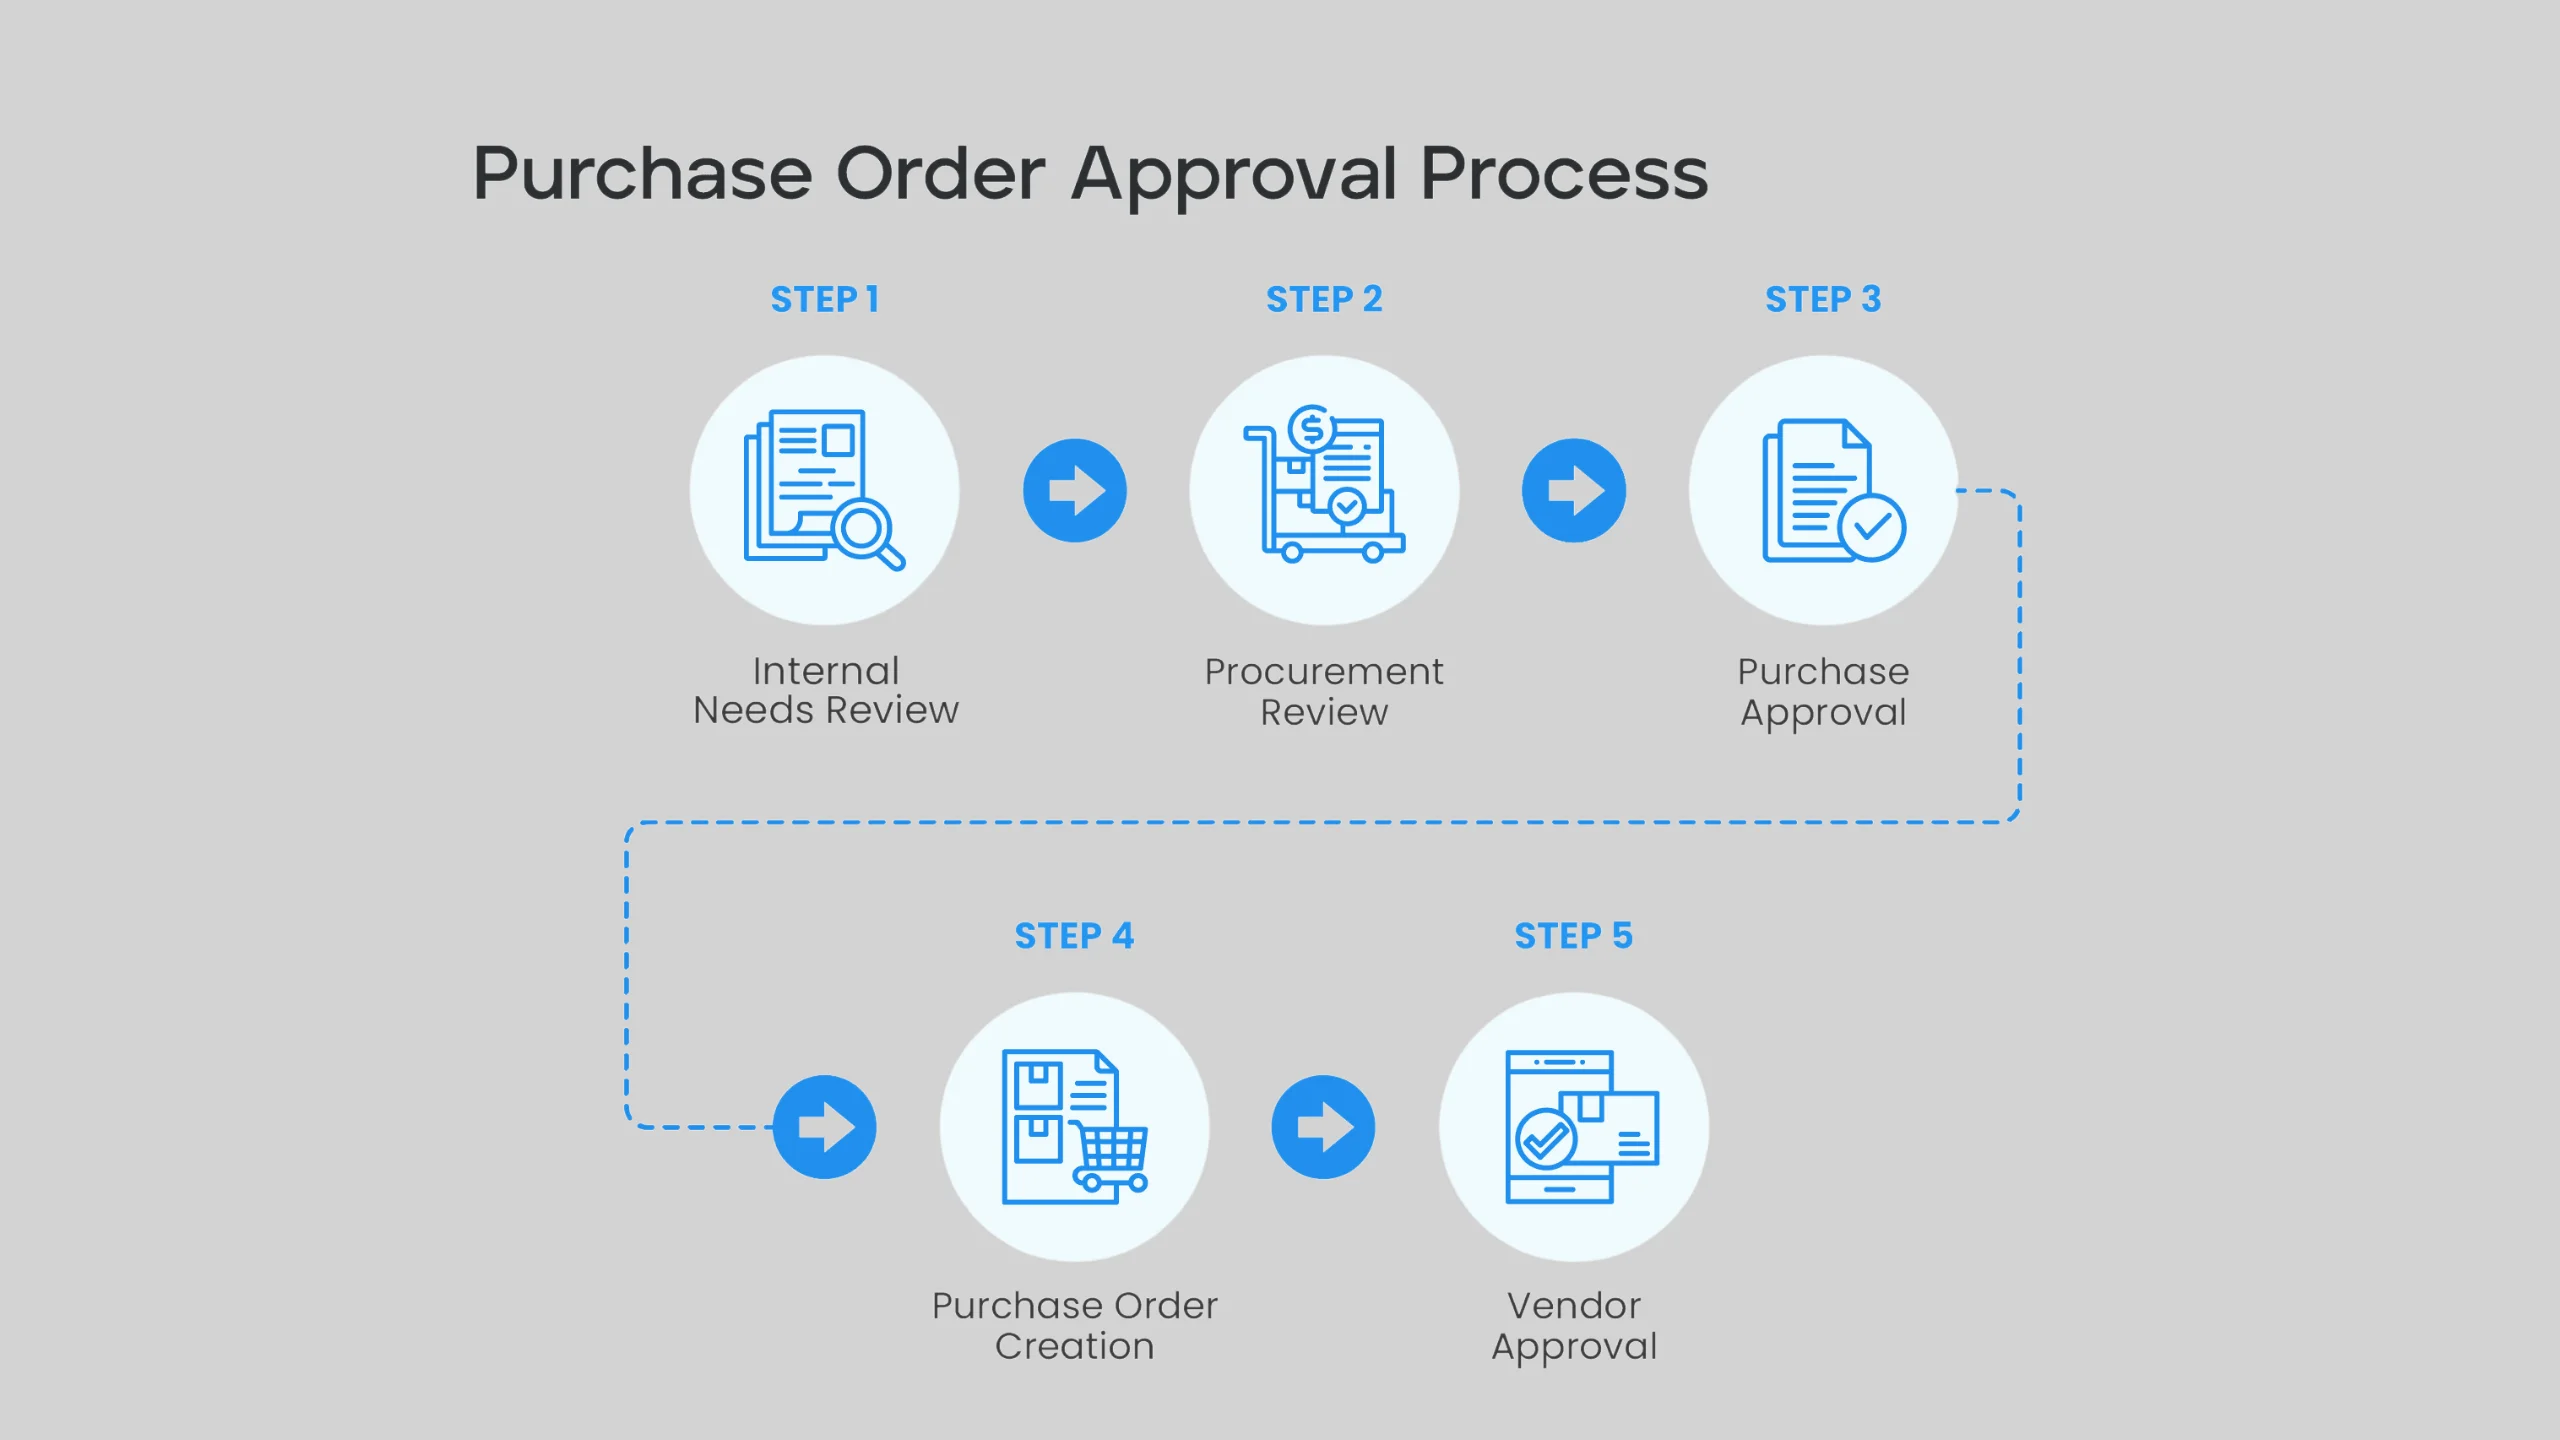 How to Implement Automated Approvals in Purchase Orders